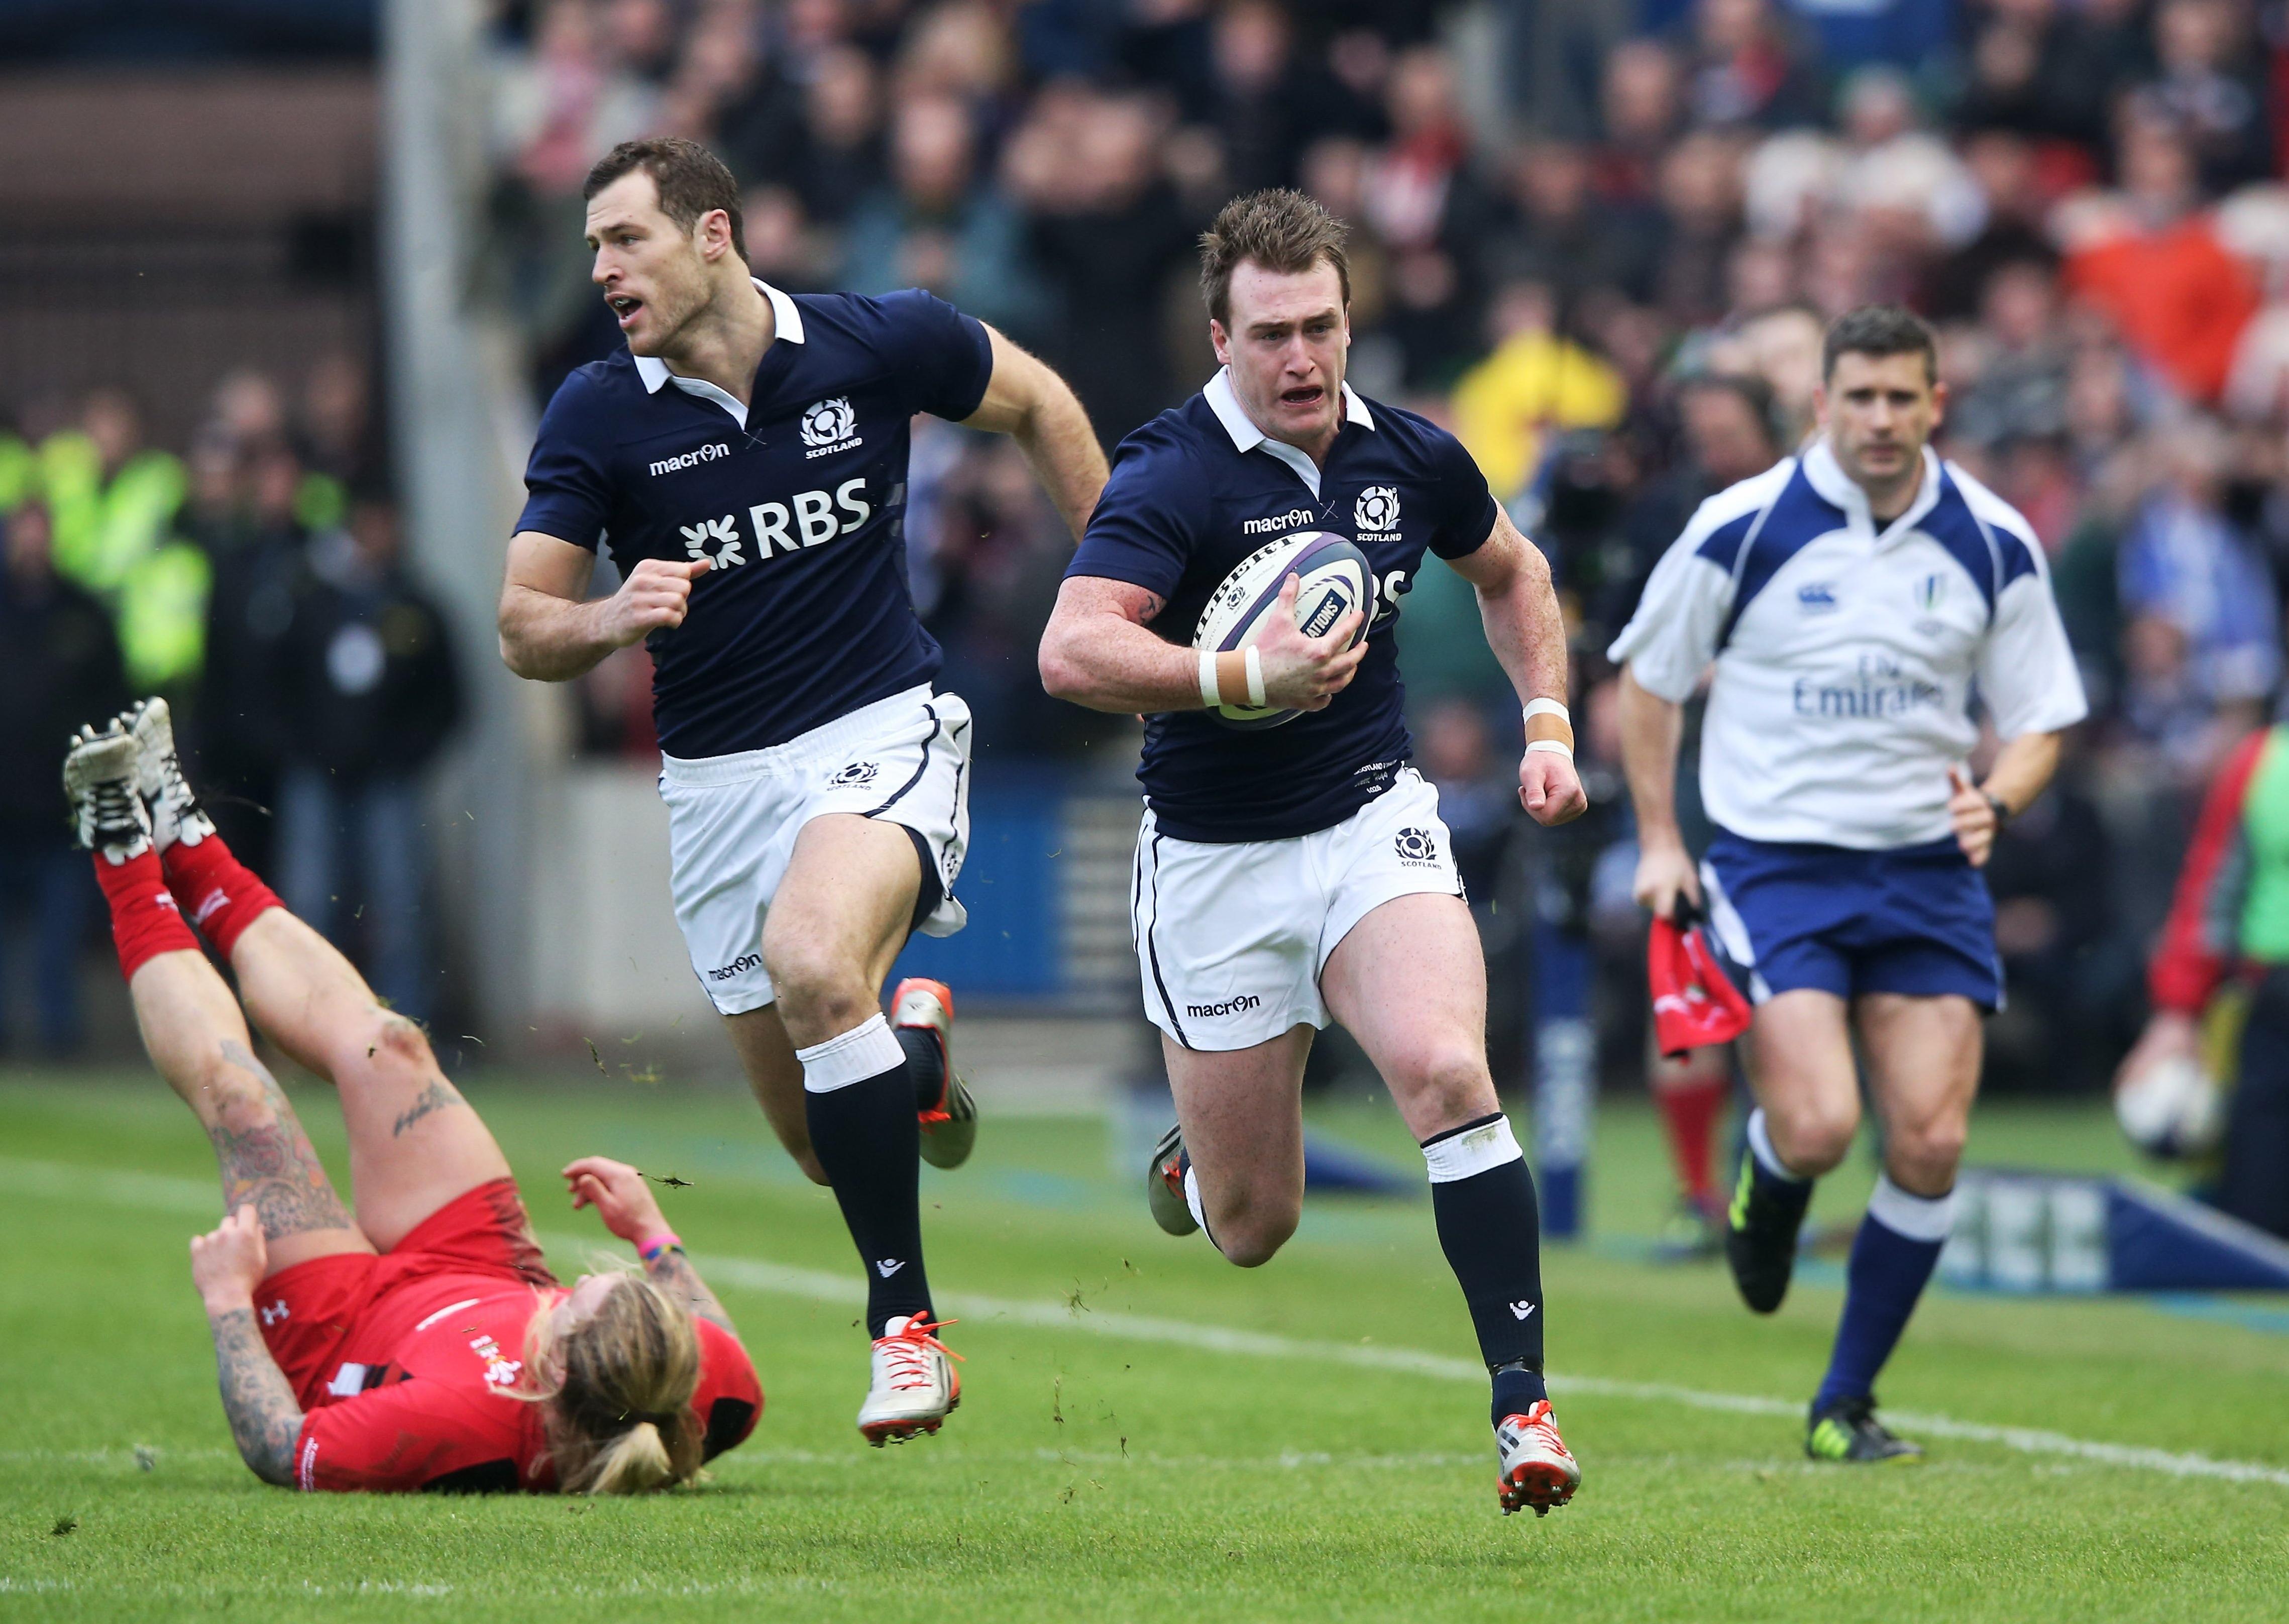 EDINBURGH, SCOTLAND - FEBRUARY 15:  Stuart Hogg of Scotland breaks away to score the opening try during the RBS Six Nations match between Scotland and Wales at Murrayfield Stadium on February 15, 2015 in Edinburgh, Scotland.  (Photo by David Rogers/Getty Images)